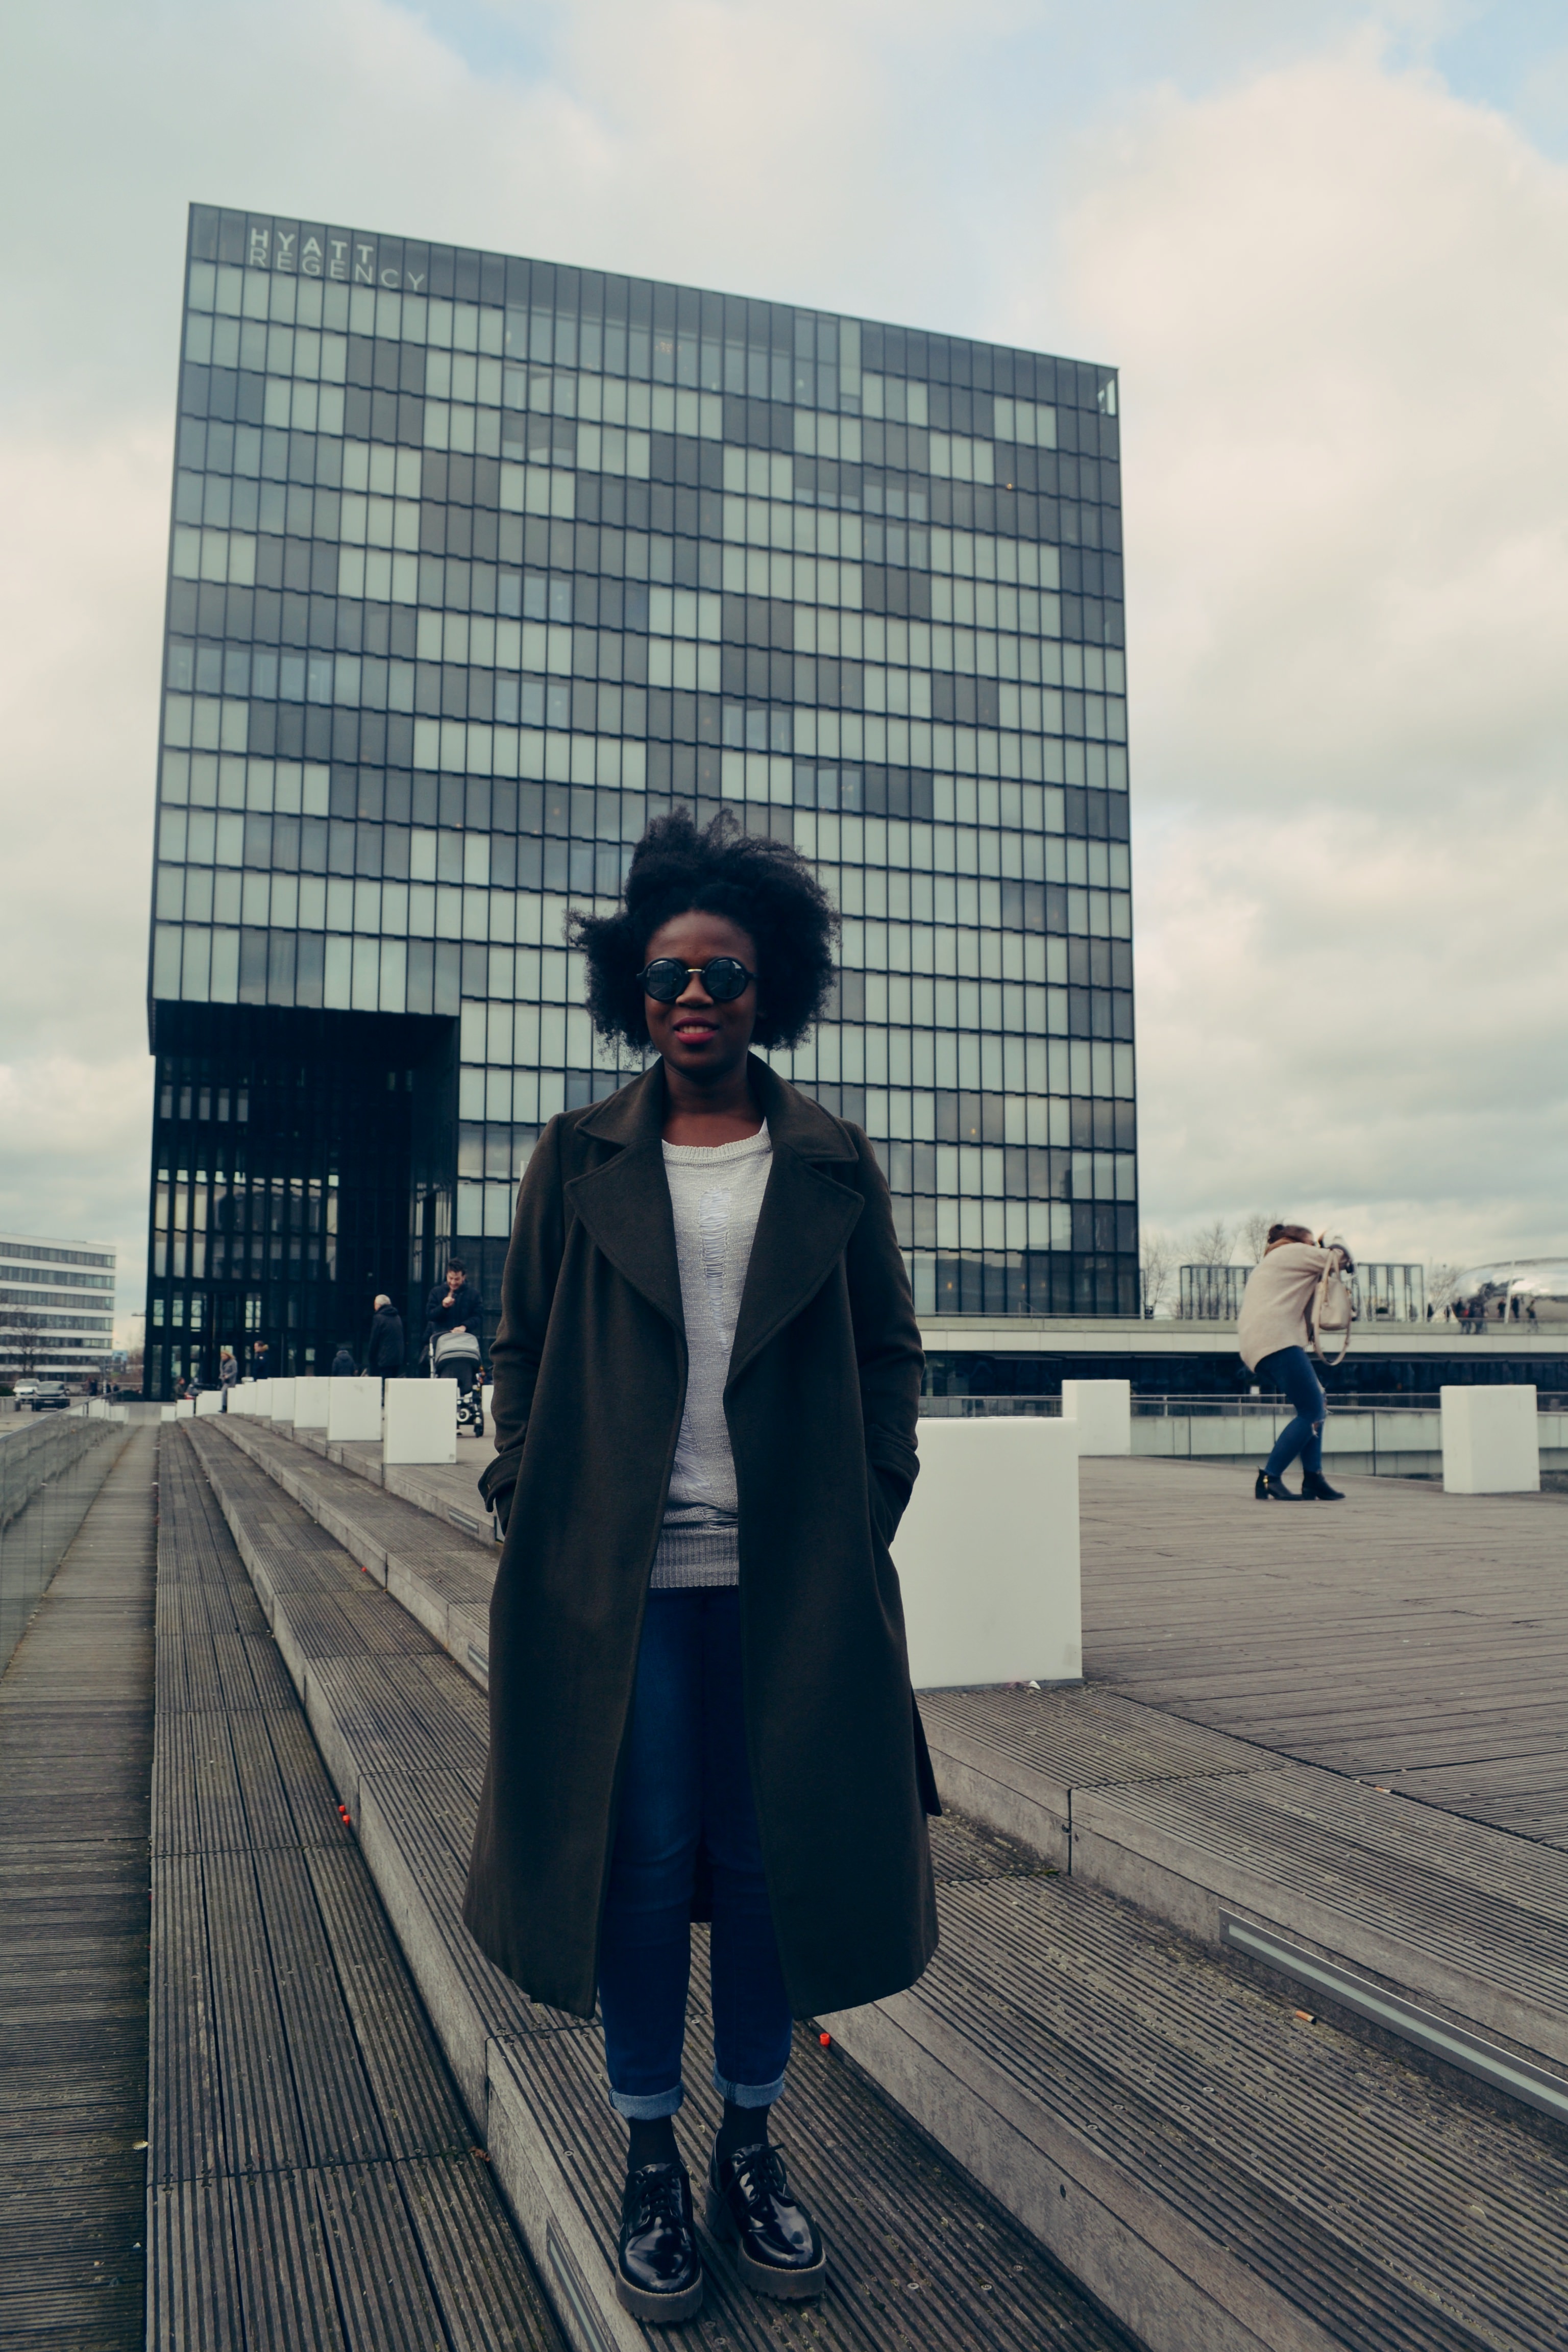 A woman stands in front of the Hyatt in Düsseldorf (the building looks like a square with black windows) in a khaki longline coat.